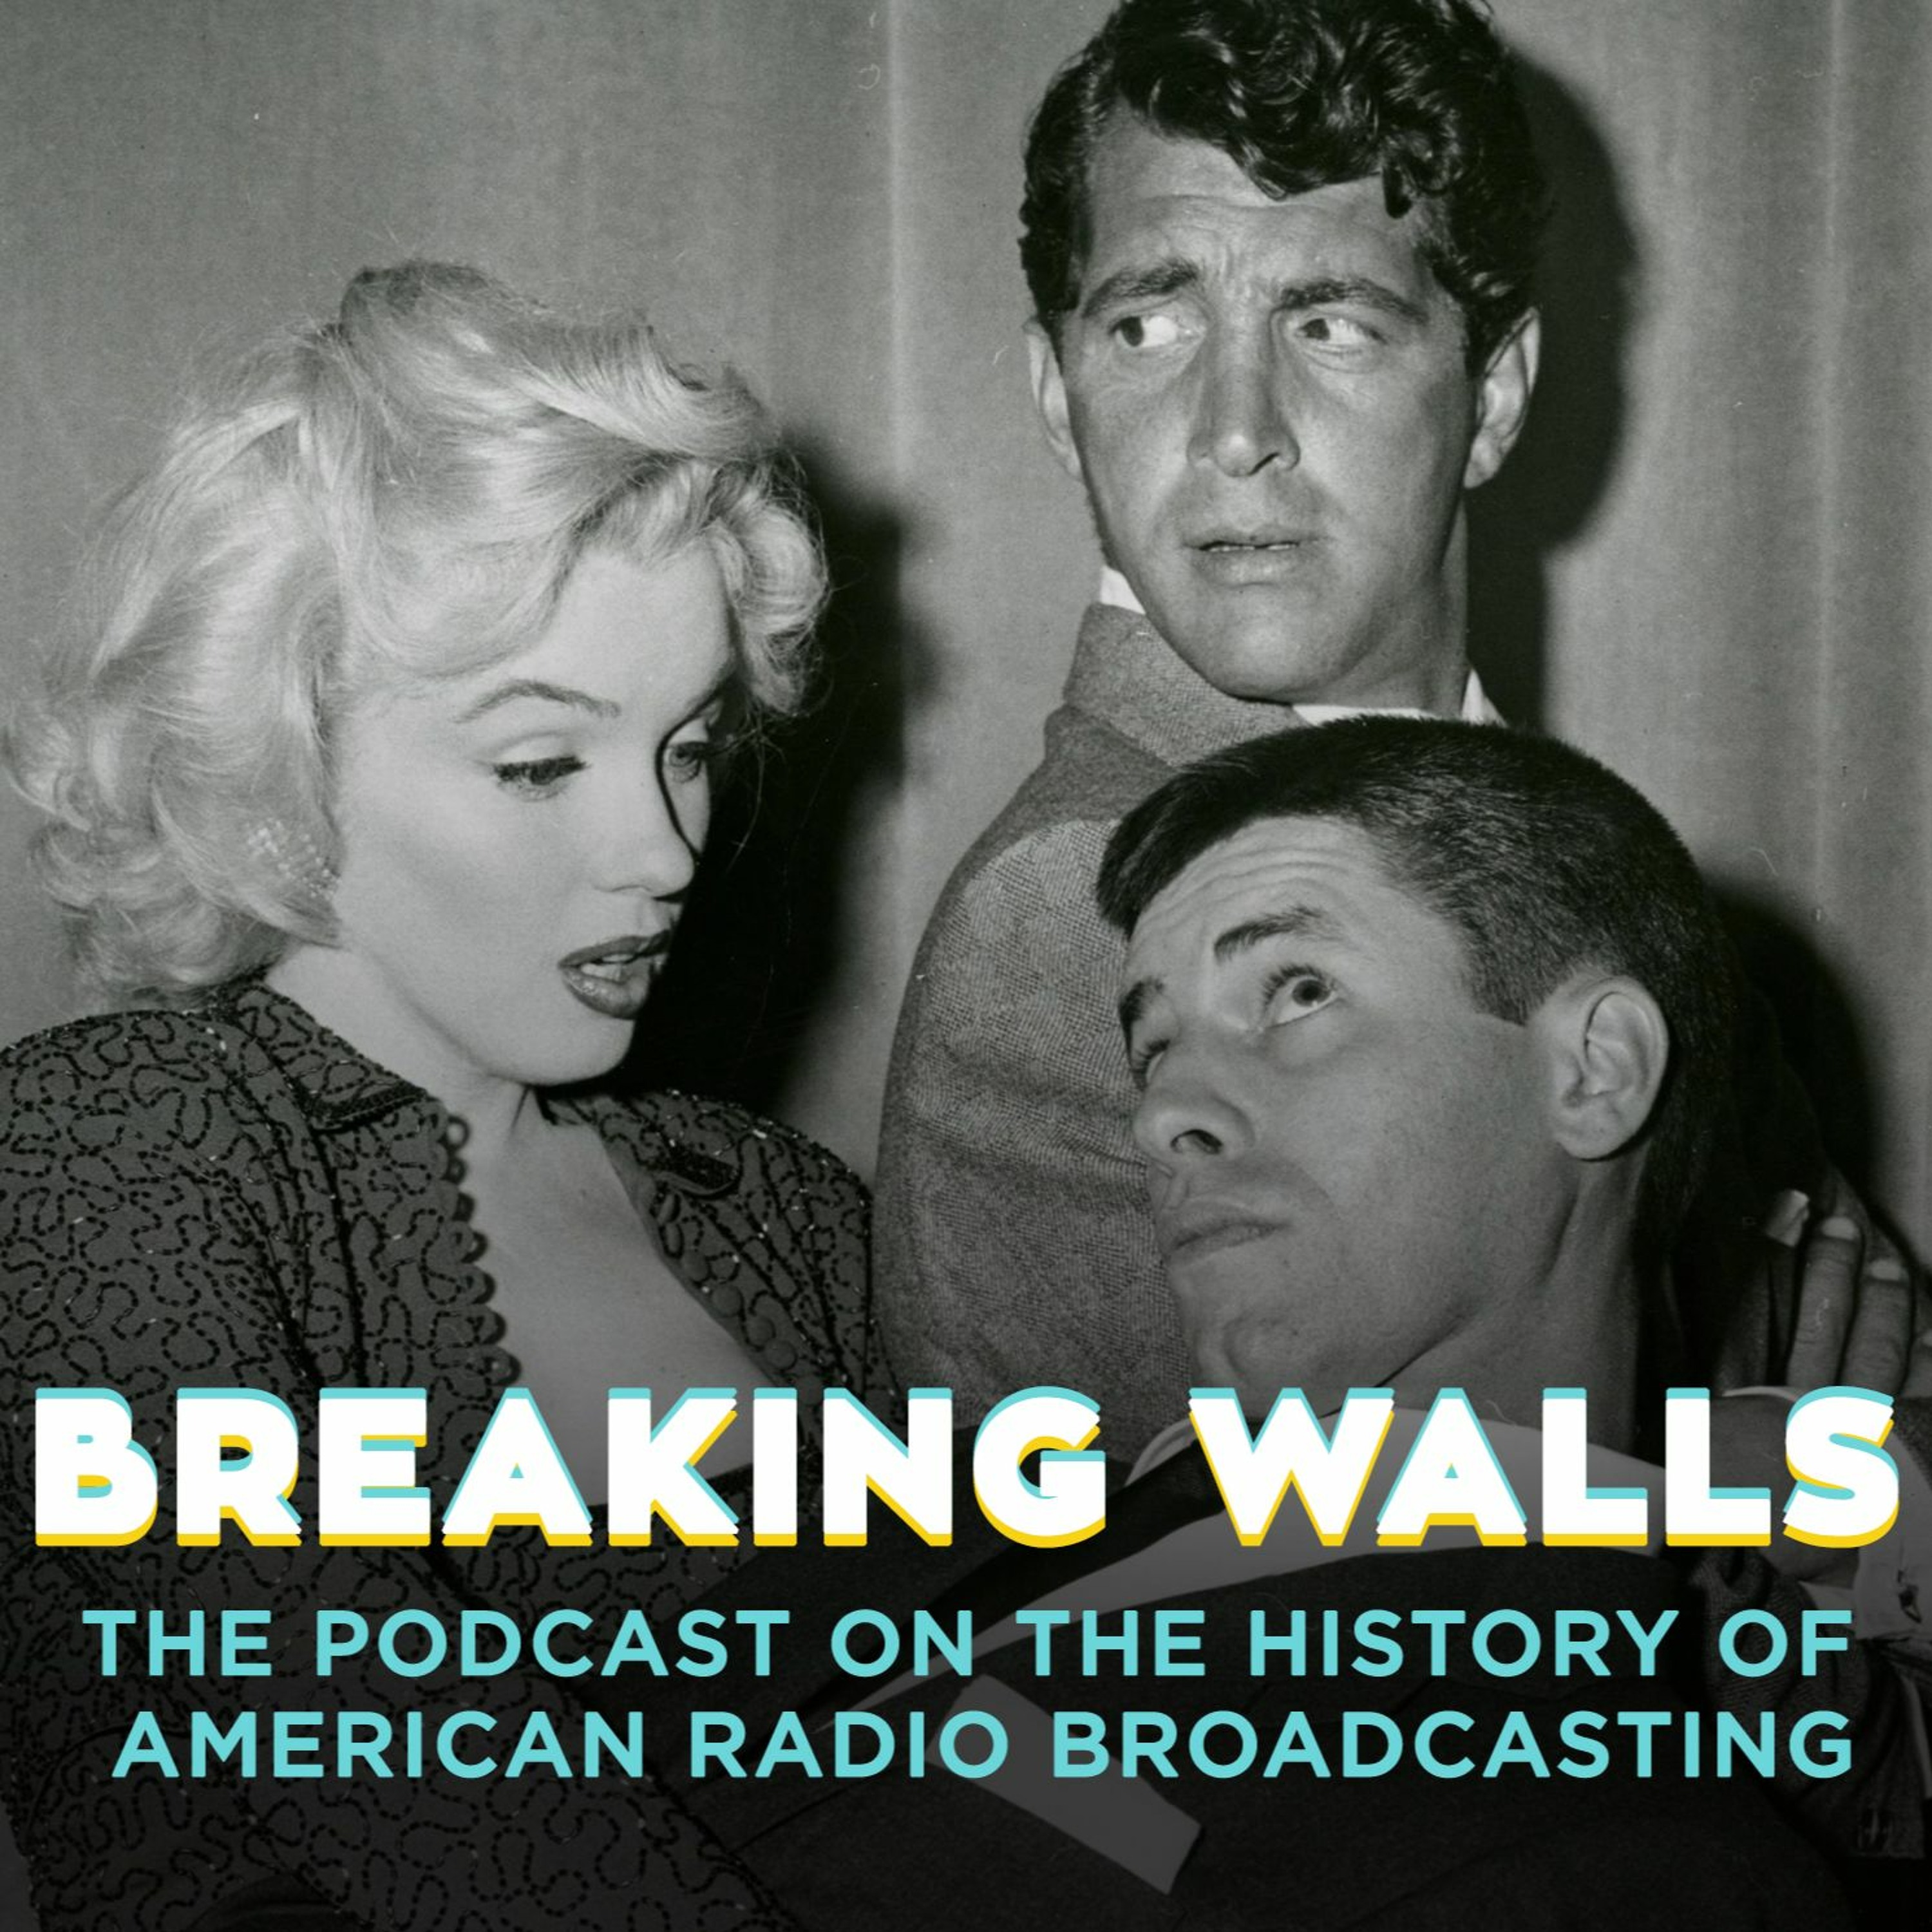 BW - EP139: Martin And Lewis with Marilyn Monroe & Frank Sinatra (1949 - 1953)